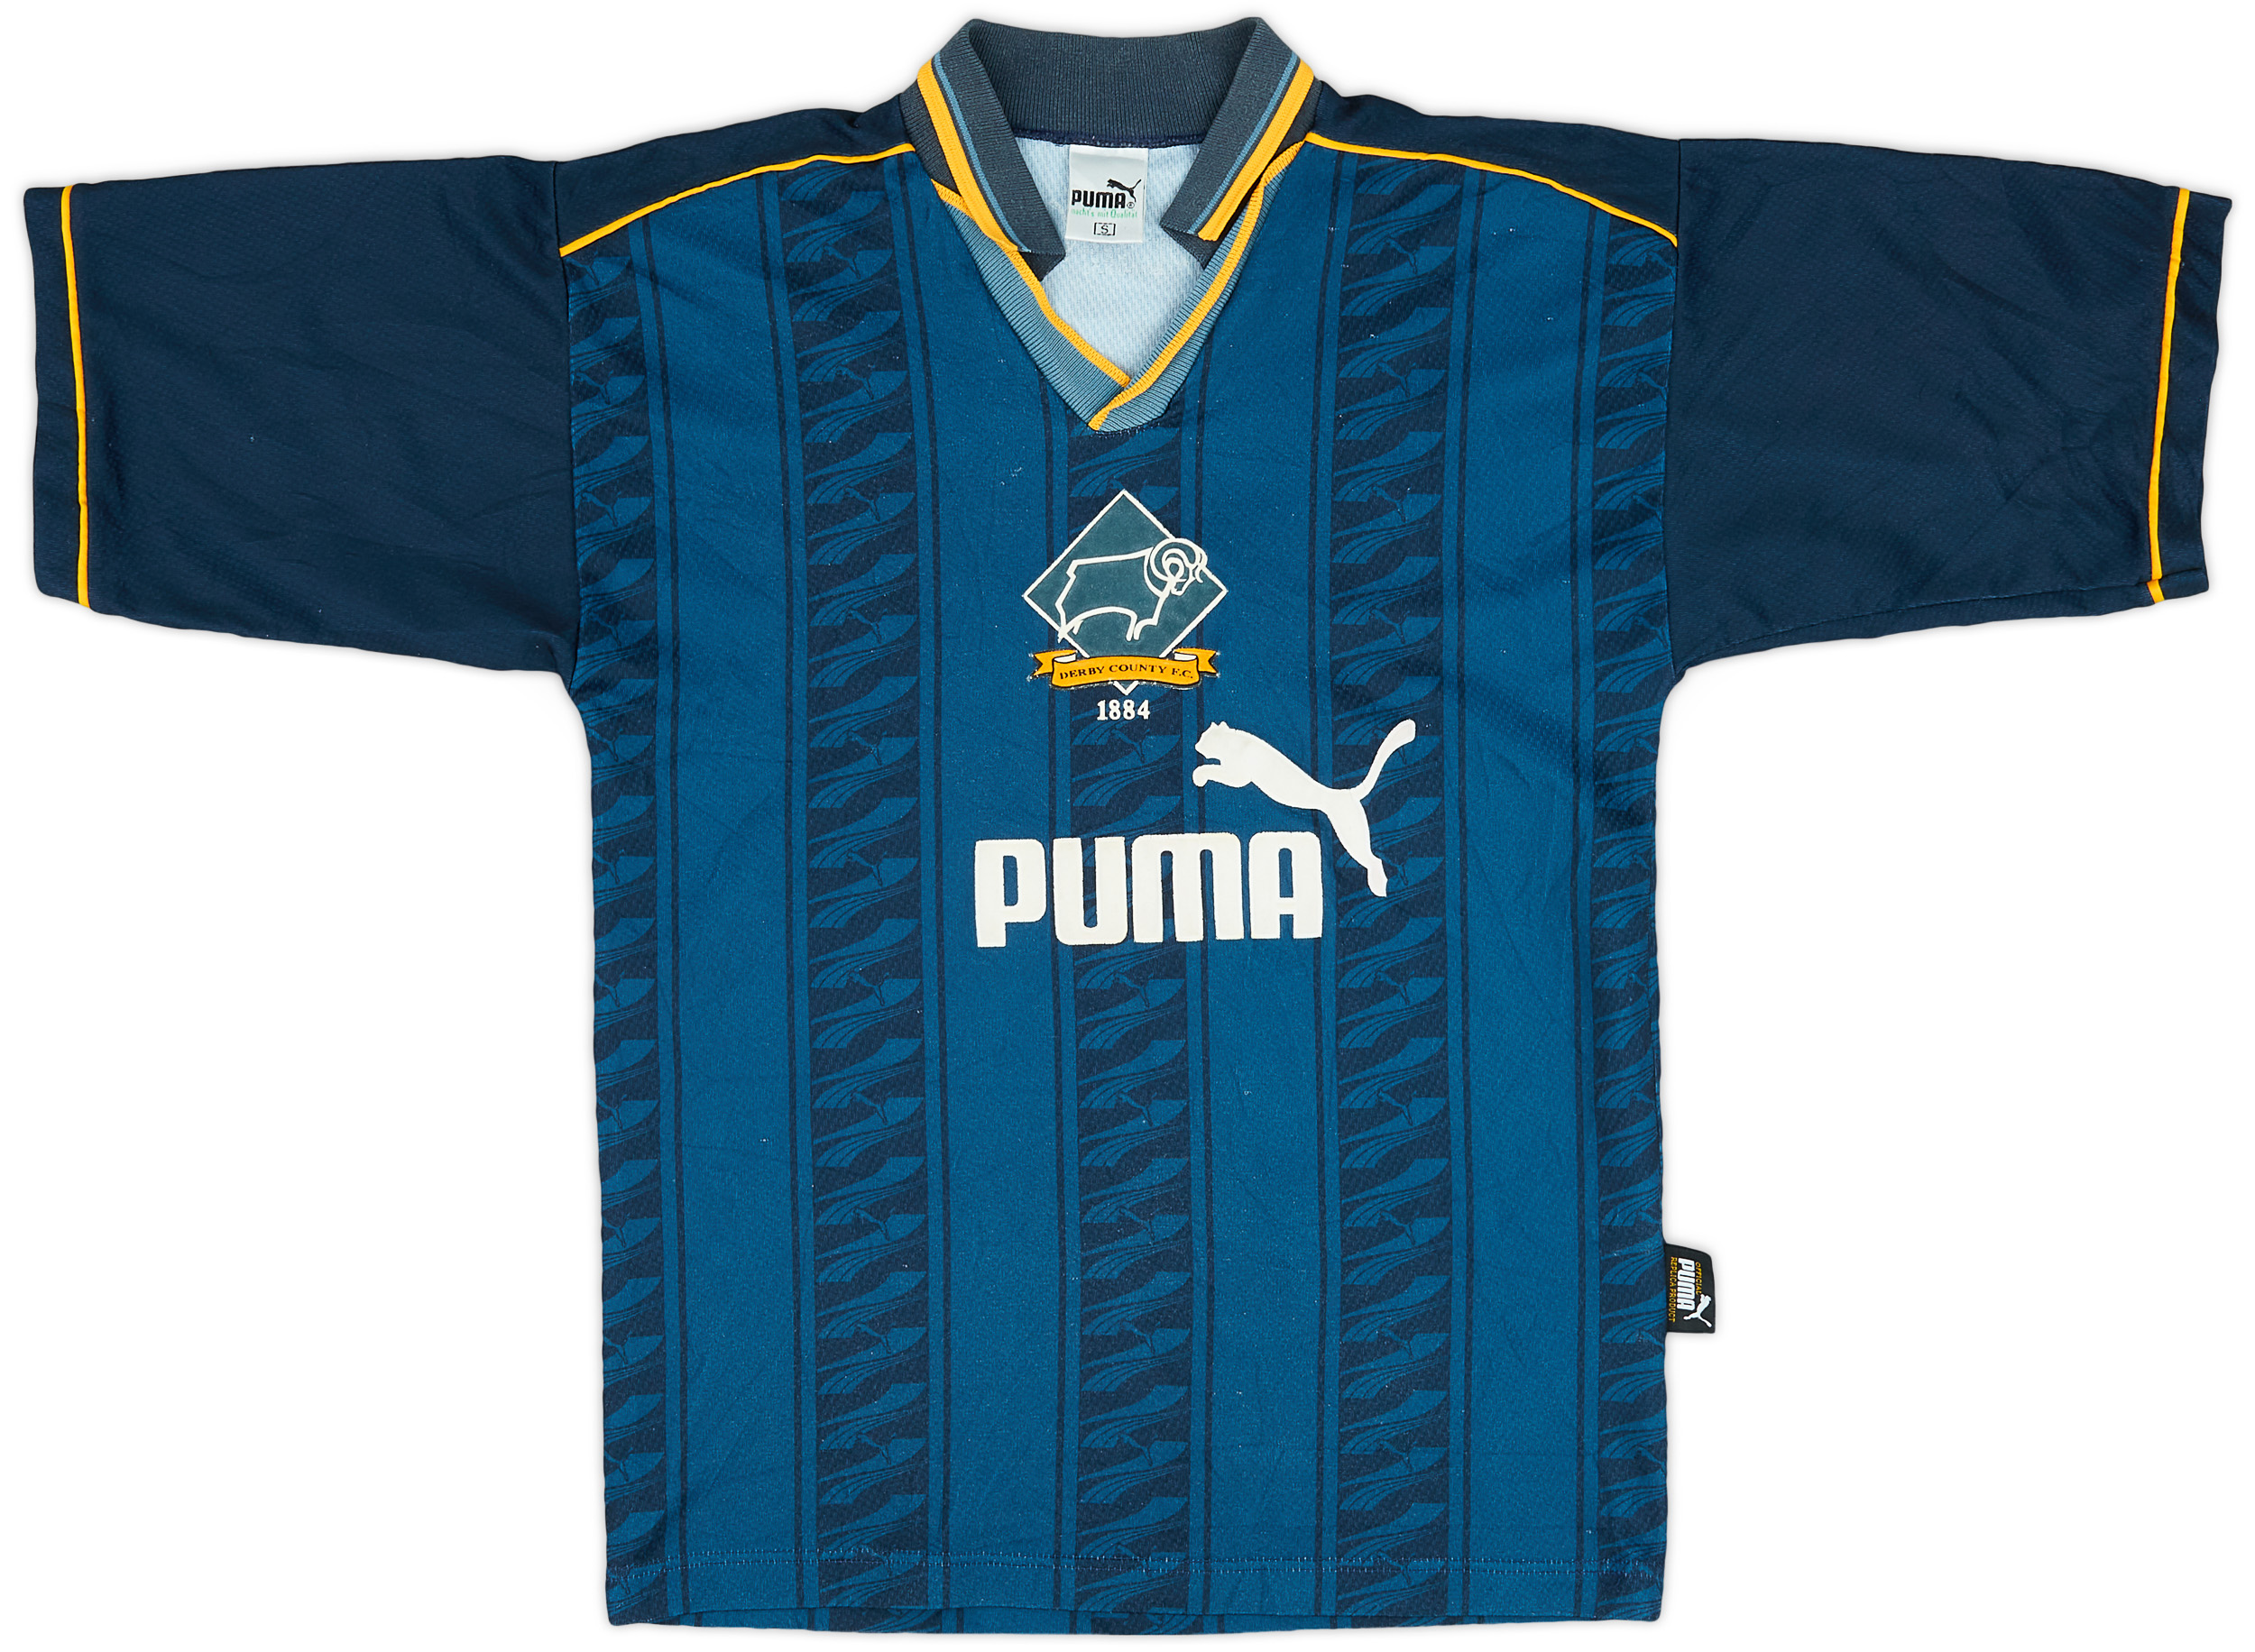 1995-96 Derby County Away Shirt - 7/10 - ()